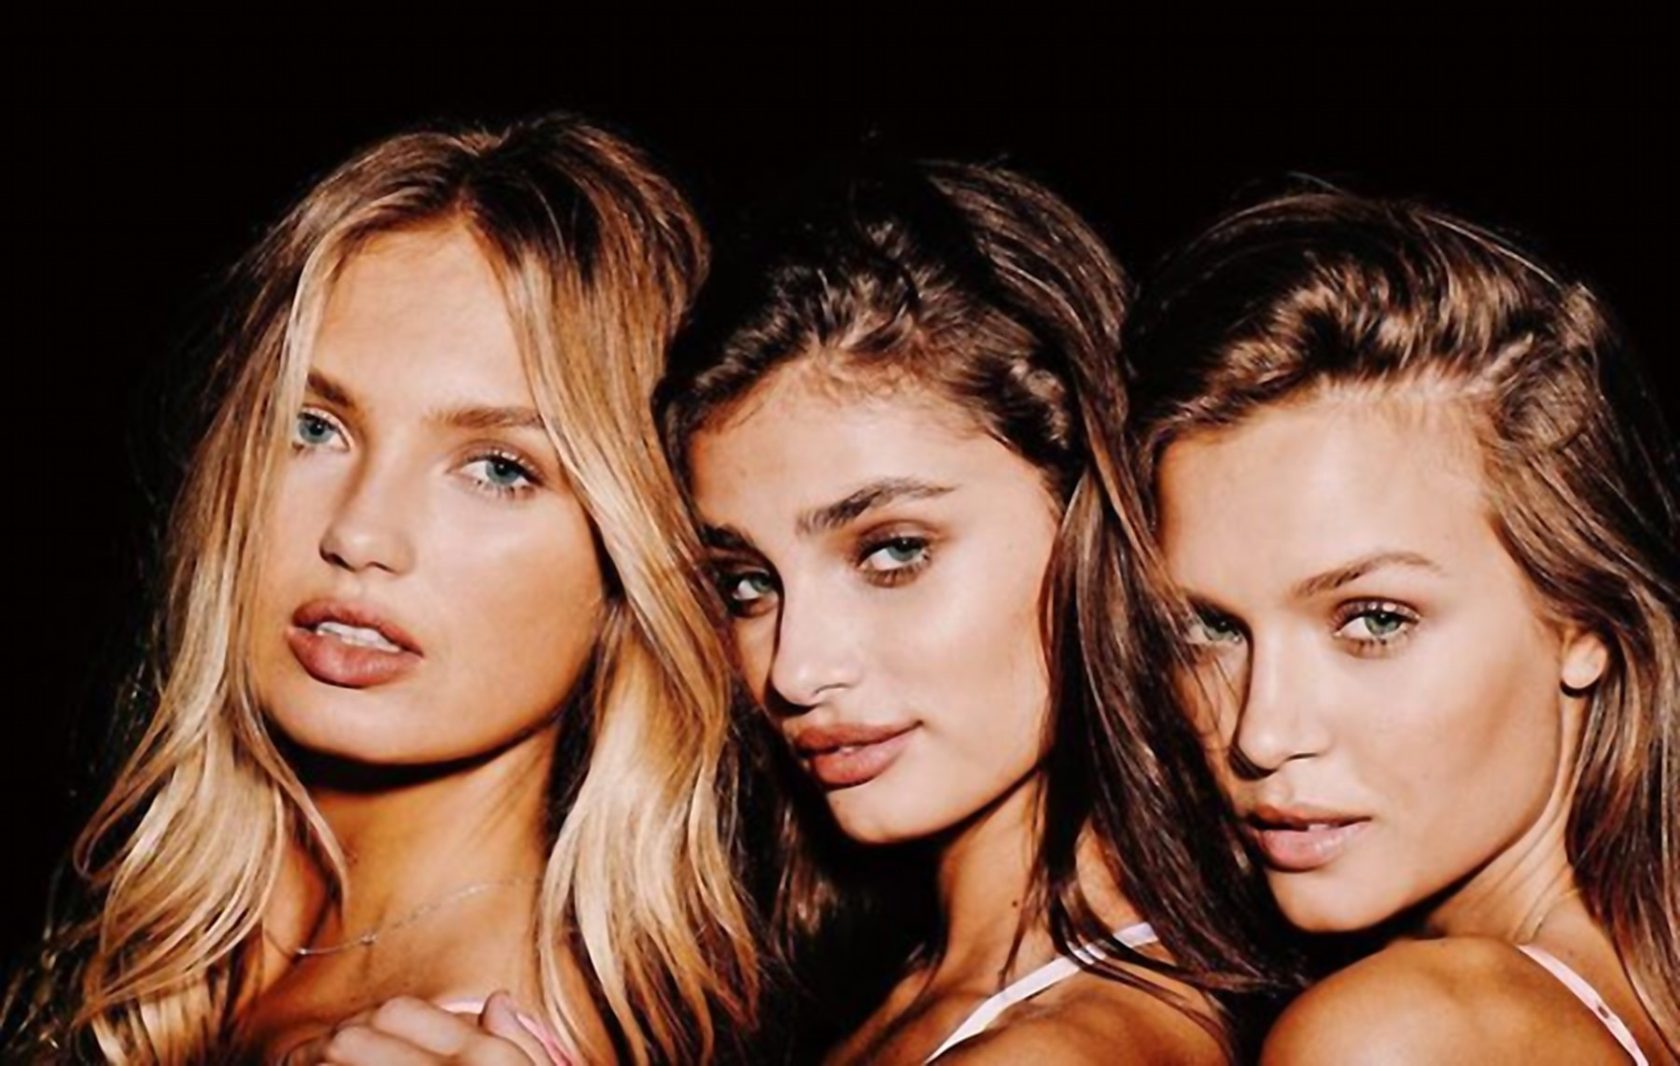 Romee Strijd has posted a photo on Instagram with the following remarks: We're ready for day 2 #somethingbigiscoming16 Instagram, 2015-12-14 11:32:10. Photo supplied by insight media. Service fee applies. This is a private photo posted on social networks and supplied by this Agency. This Agency does not claim any ownership including but not limited to copyright or license in the attached material. Fees charged by this Agency are for Agency's services only, and do not, nor are they intended to, convey to the user any ownership of copyright or license in the material. By publishing this material you expressly agree to indemnify and to hold this Agency and its directors, shareholders and employees harmless from any loss, claims, damages, demands, expenses (including legal fees), or any causes of action or allegation against this Agency arising out of or connected in any way with publication of the material., Image: 269103423, License: Rights-managed, Restrictions: Photo supplied by insight media. For editorial use only. Single rate handling fee required., Model Release: no, Credit line: Profimedia, Insight Media